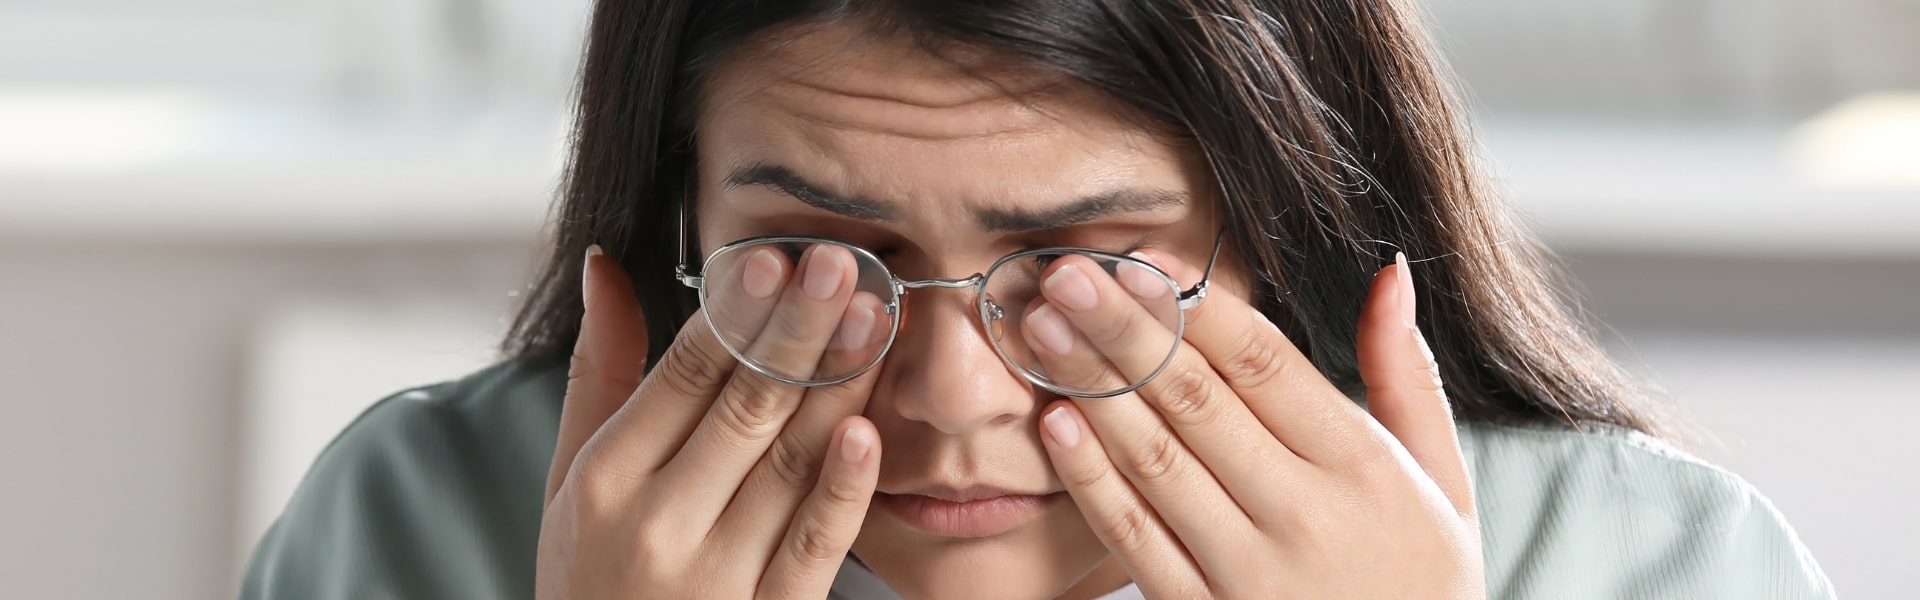 Girl rubbing her eyes due to prologed computer use